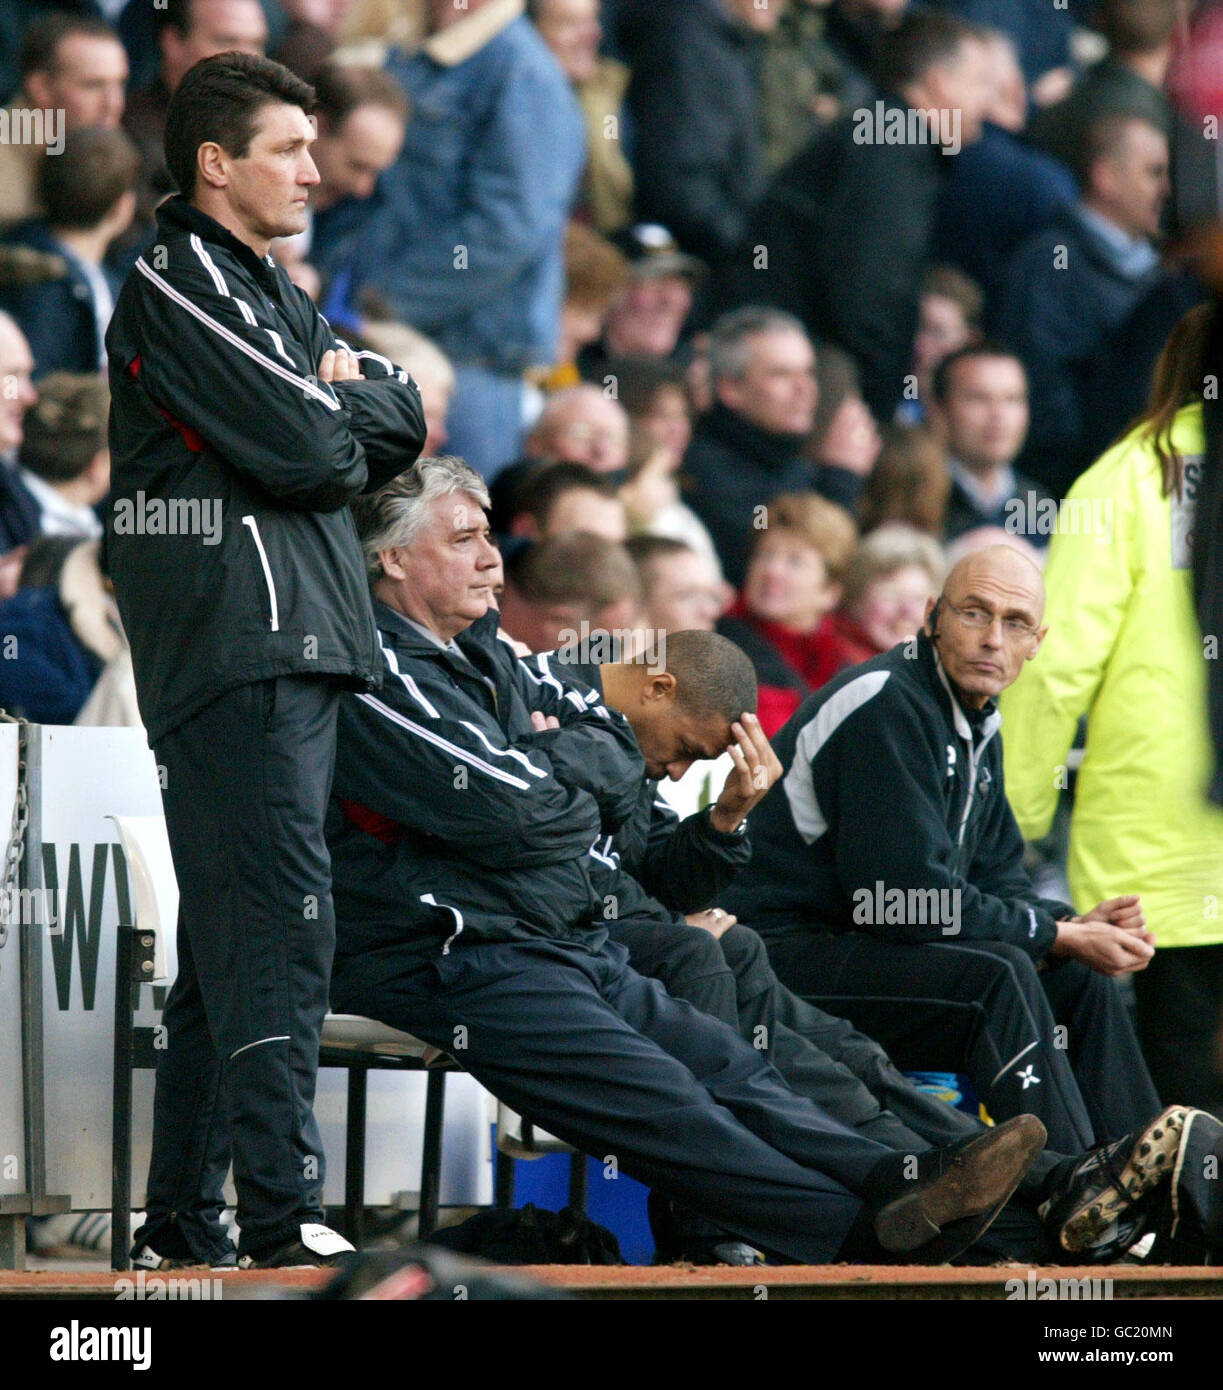 Soccer - Coca-Cola Football League Championship - Derby County v Nottingham Forest. Gloom on Nottingham Forest's bench (L-R) Mick Harford, manager Joe Kinnear and Des Walker Stock Photo